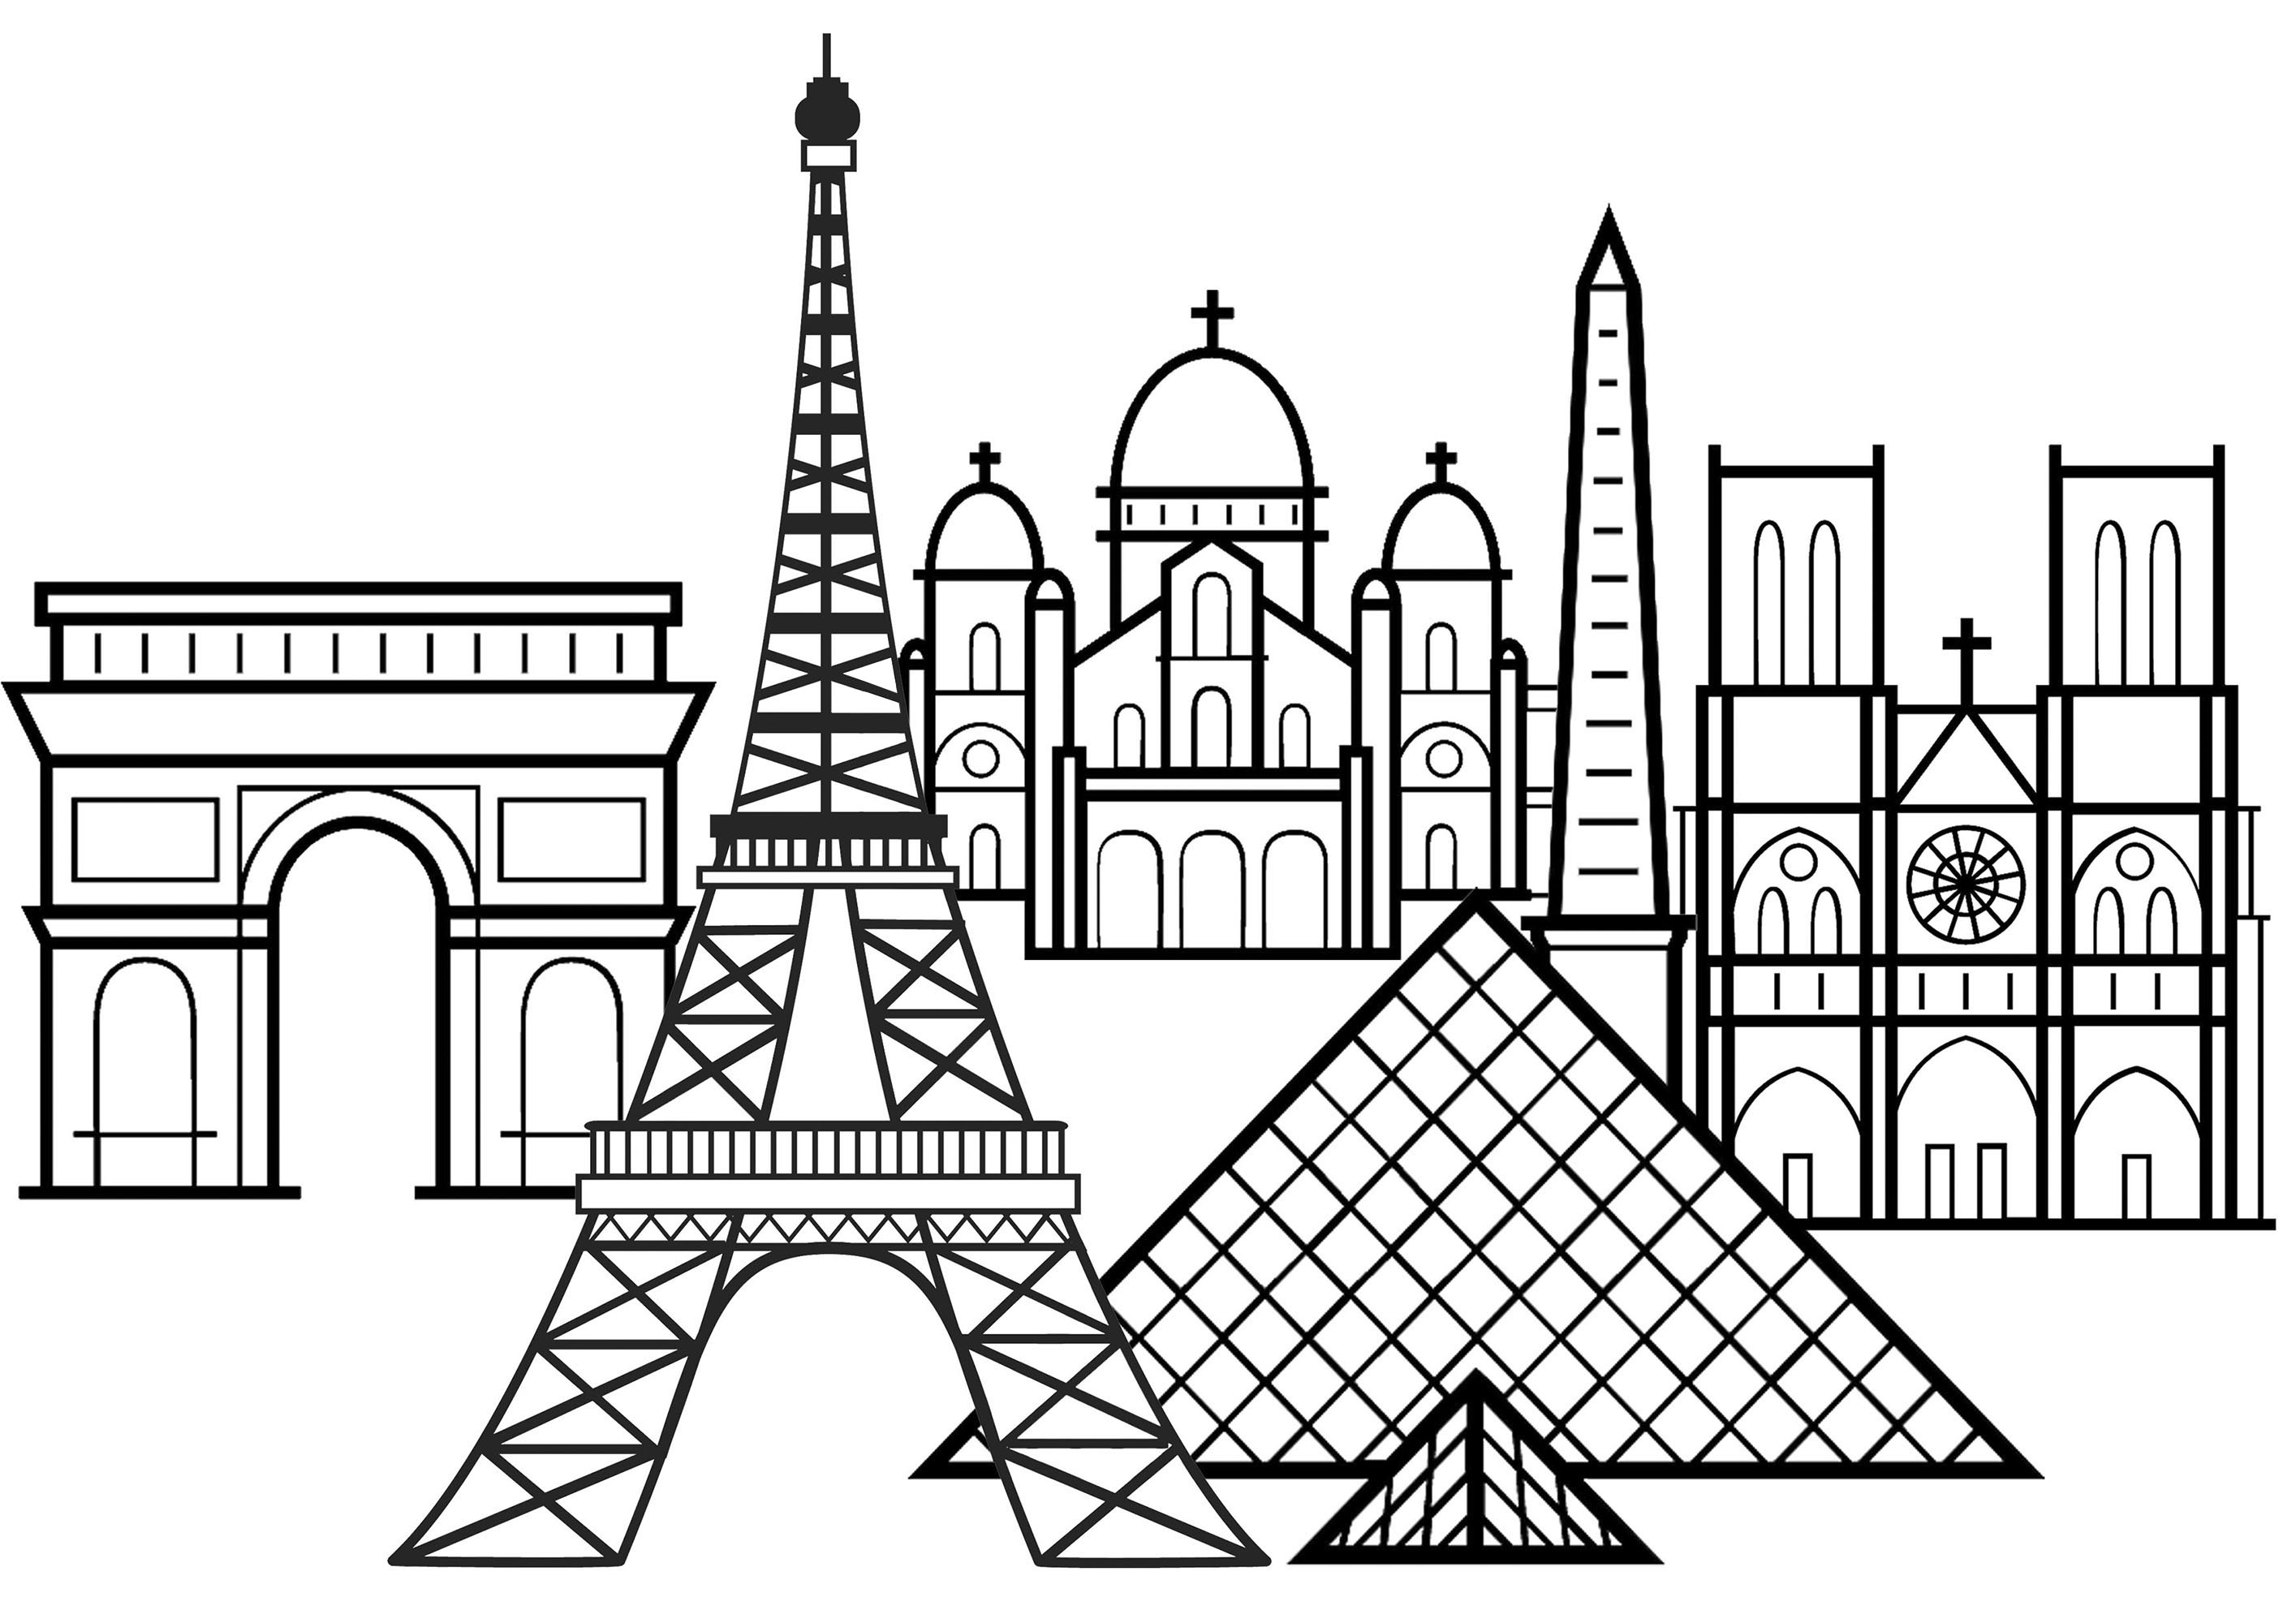 Famous monuments of Paris: Eiffel Tower, Arc de Triomphe, Notre-Dame Cathedral, Louvre Pyramid and Basilica of the Sacred Heart, Artist : Art. Isabelle